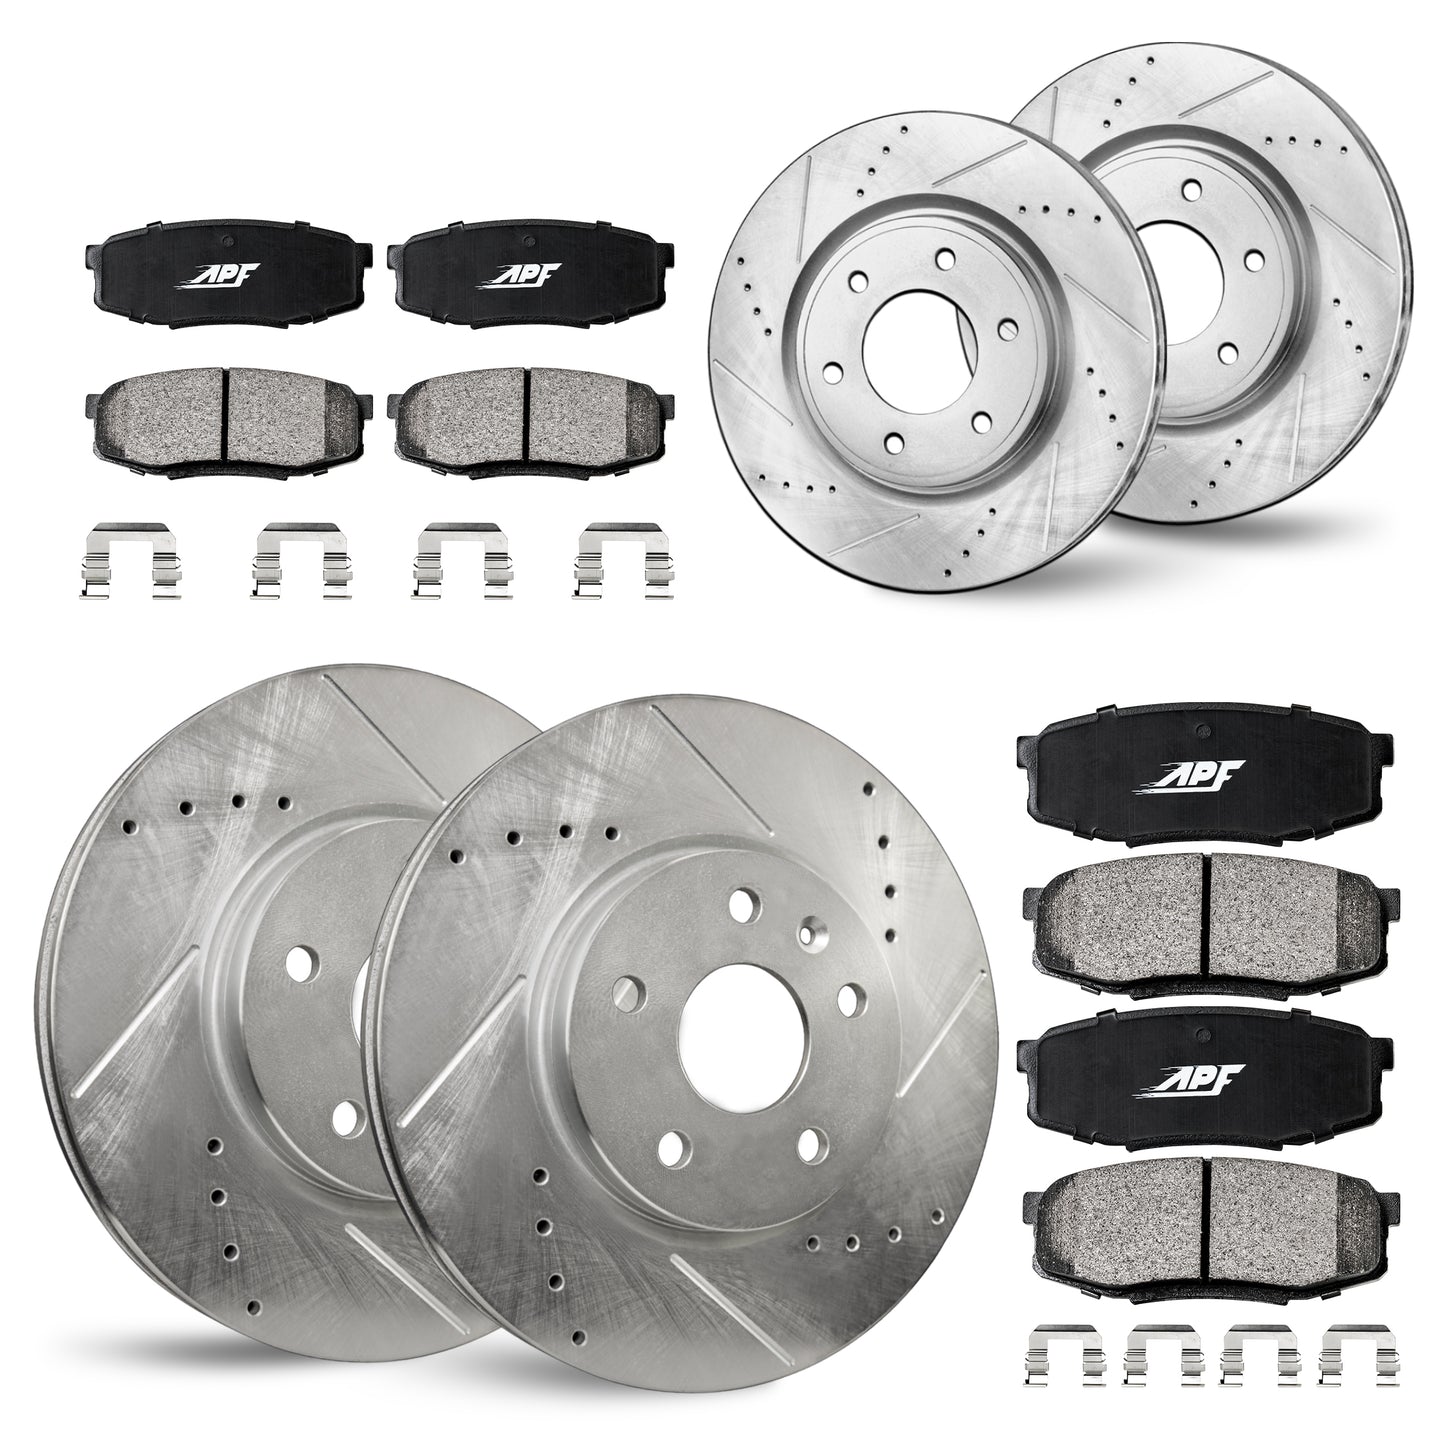 APF Full Kit compatible with GMC Sierra 1500 2014-2018 | Zinc Drilled Slotted Rotors with Ceramic Carbon Fiber Brake Pads